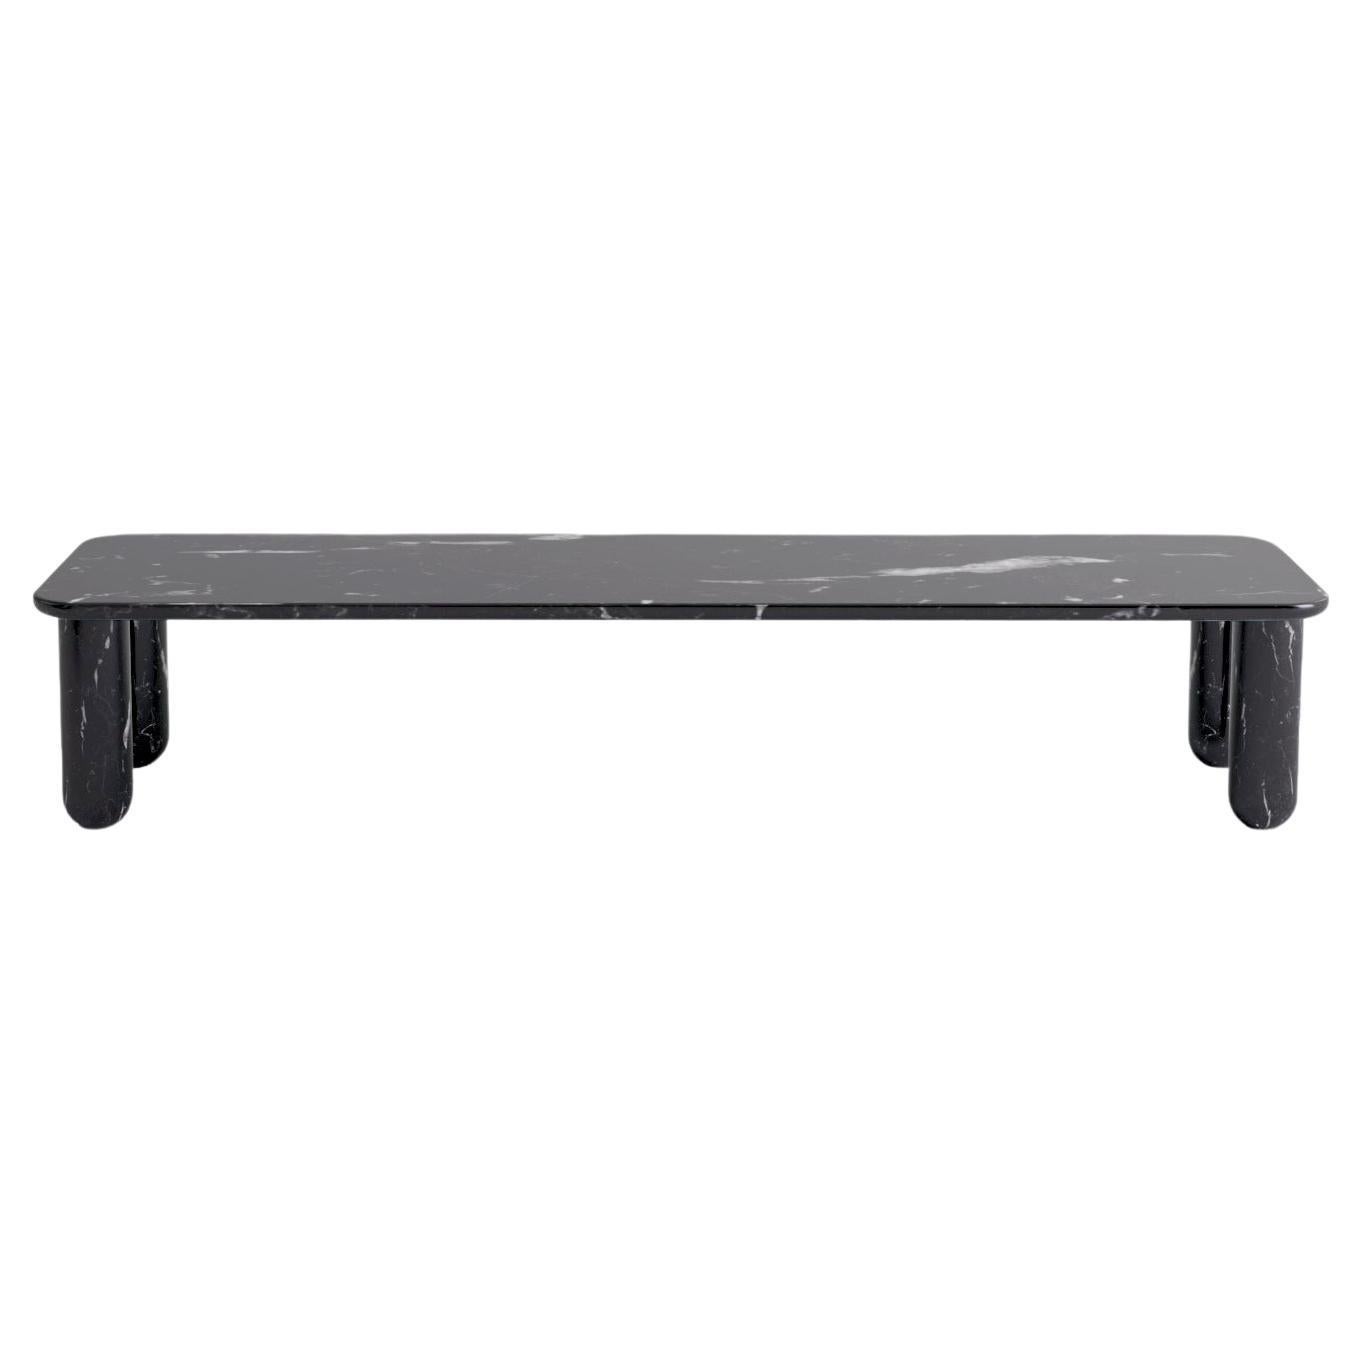 Large Black Marble "Sunday" Coffee Table, Jean-Baptiste Souletie For Sale